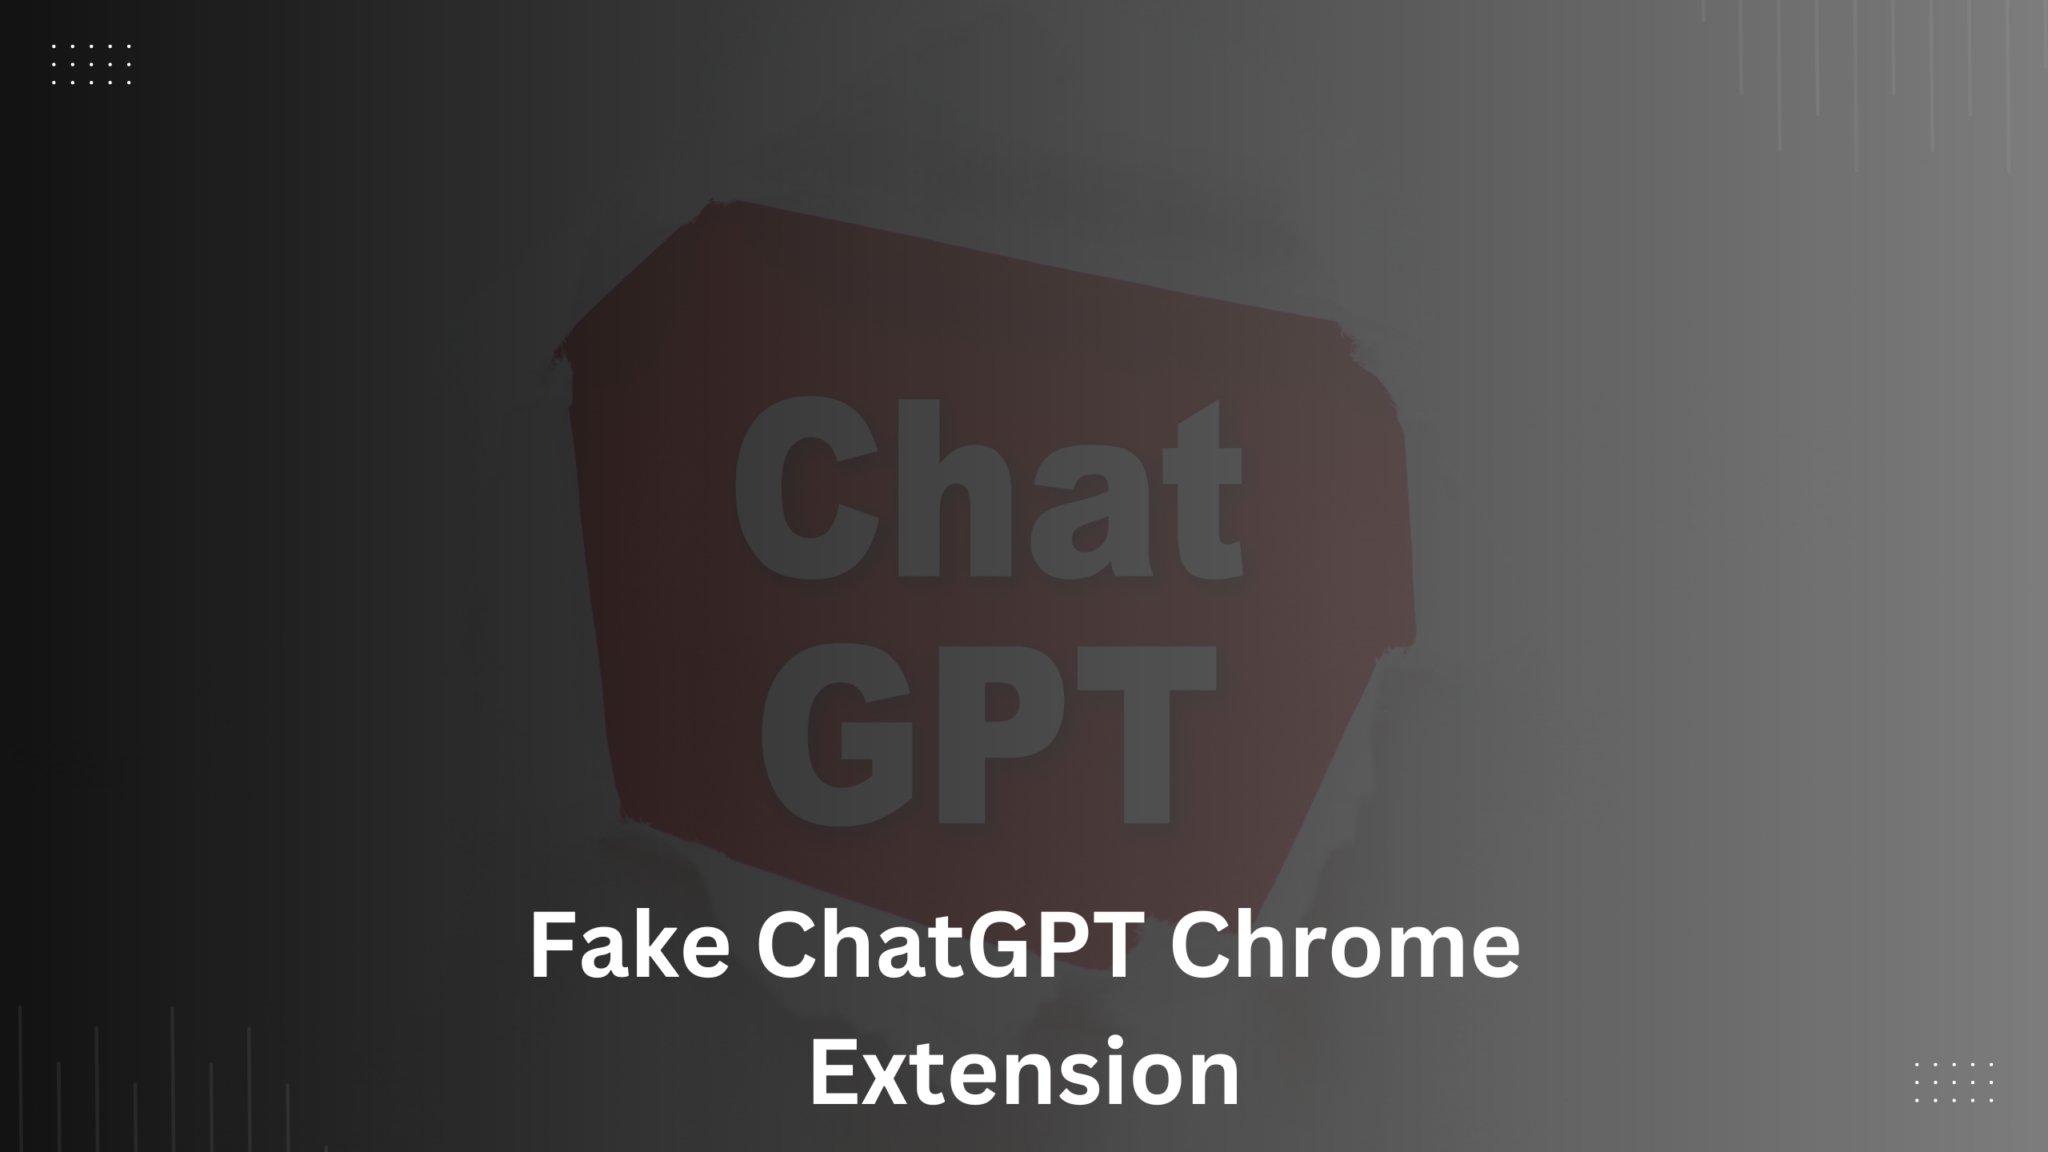 Fake ChatGPT Chrome Extension Poses Serious Threat to Online Security